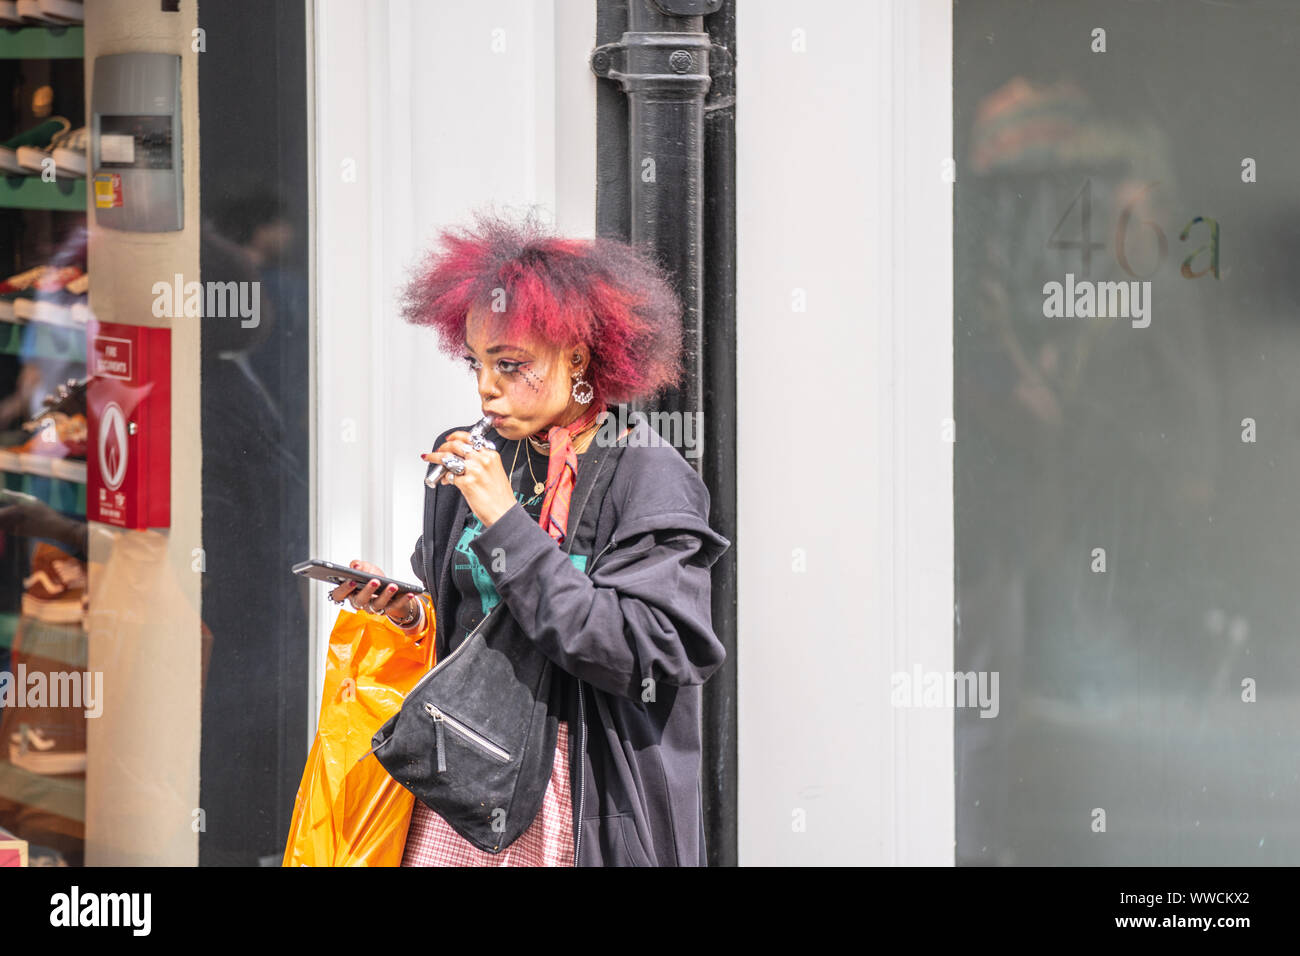 London, UK, July 14, 2019. Woman Vaping An electronic cigarette or e-cigarette, is a handheld battery-powered vaporizer Stock Photo